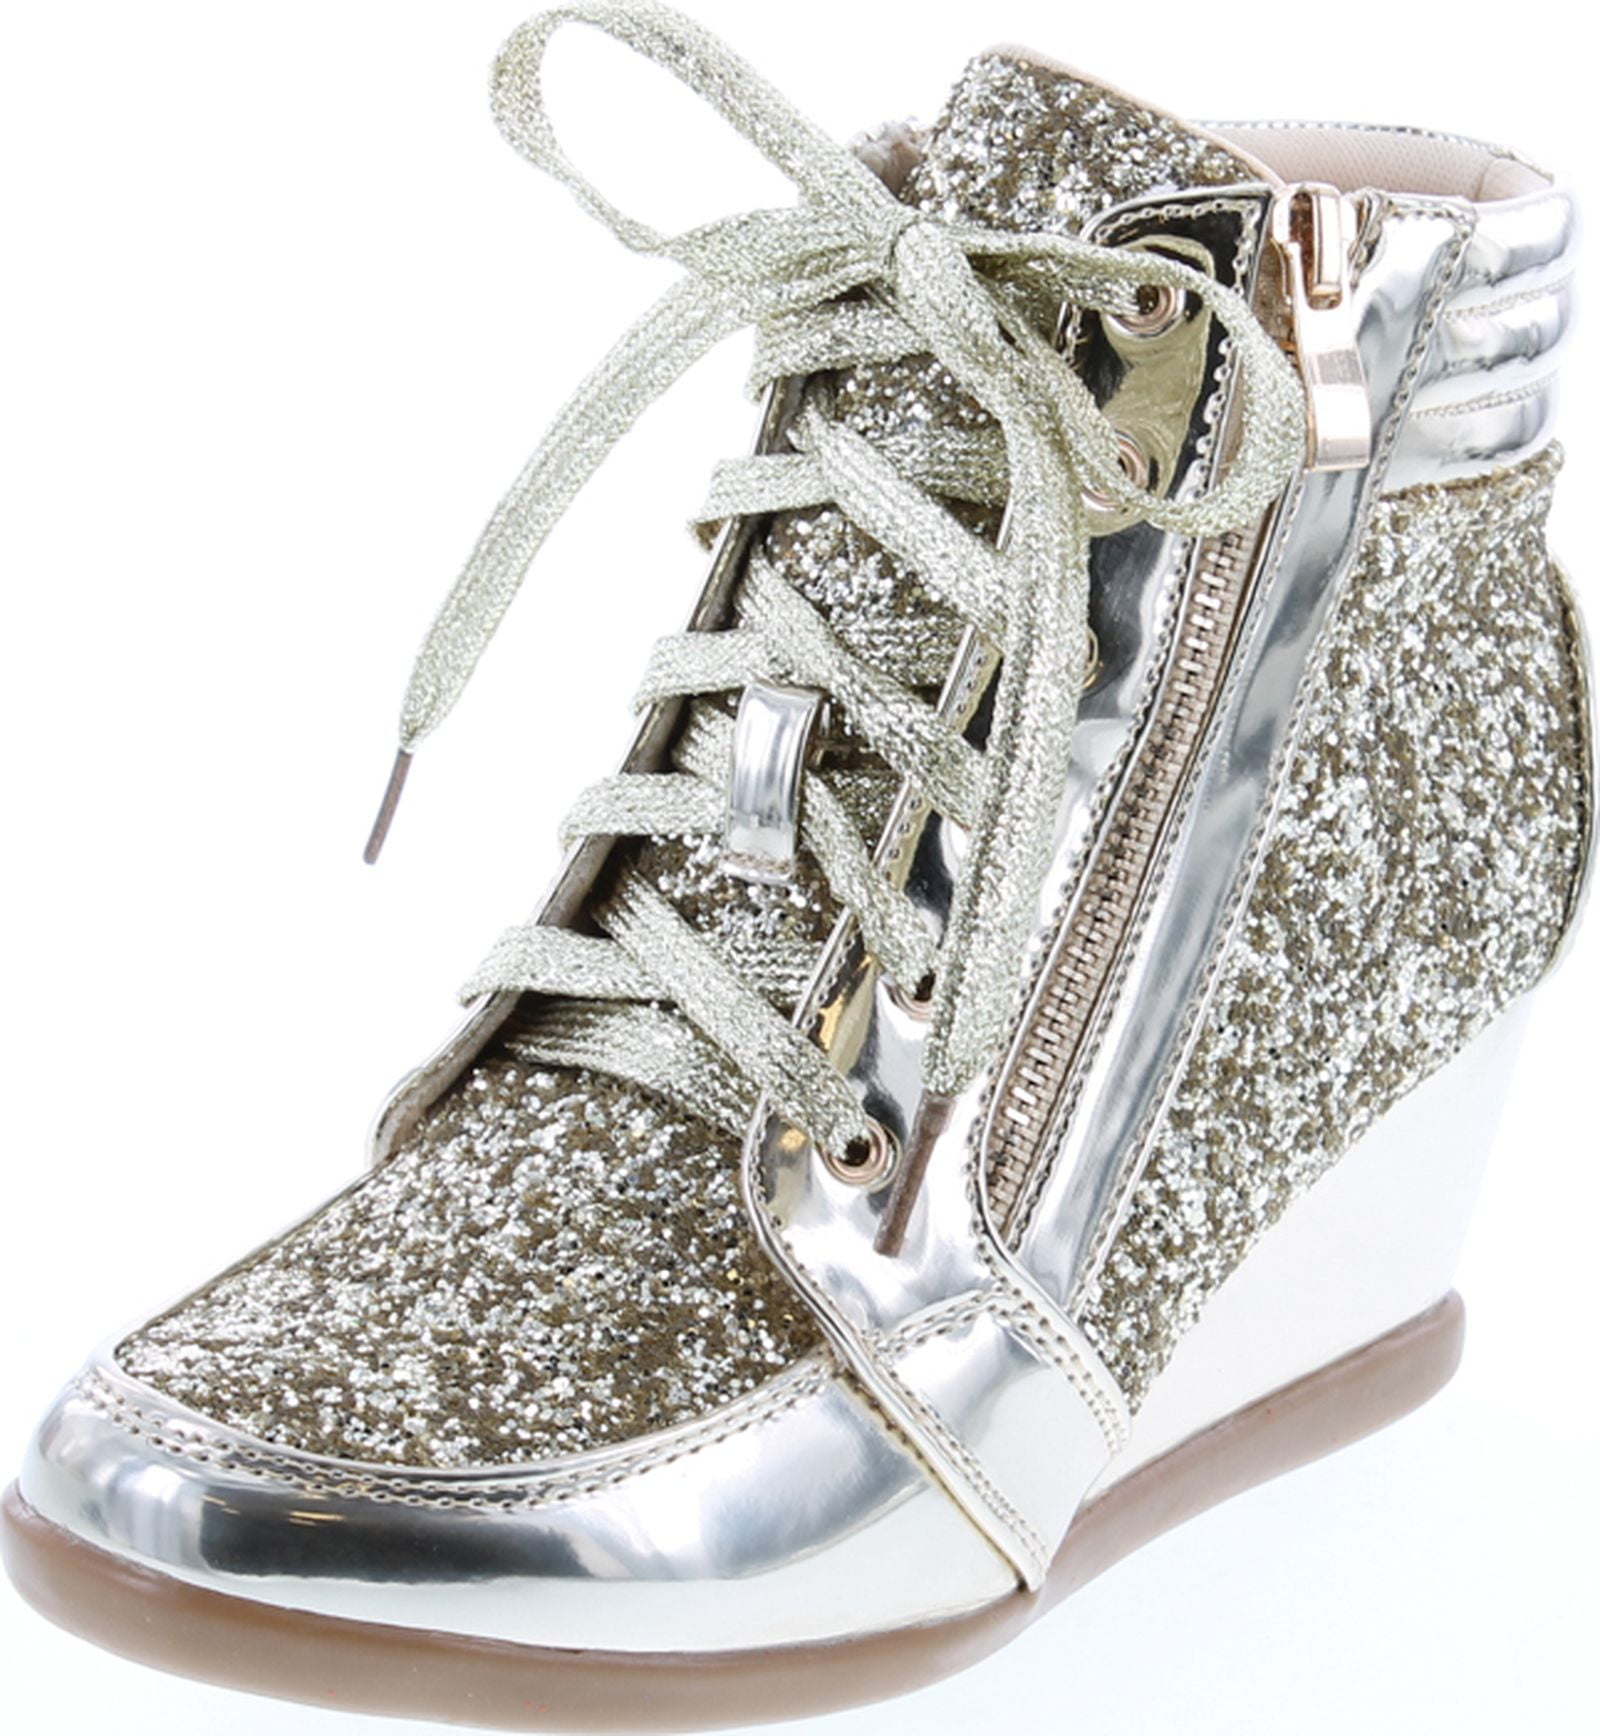 Details about   Forever Link Women's Fashion Glitter High Top Lace Up Wedge Sneaker Shoes 